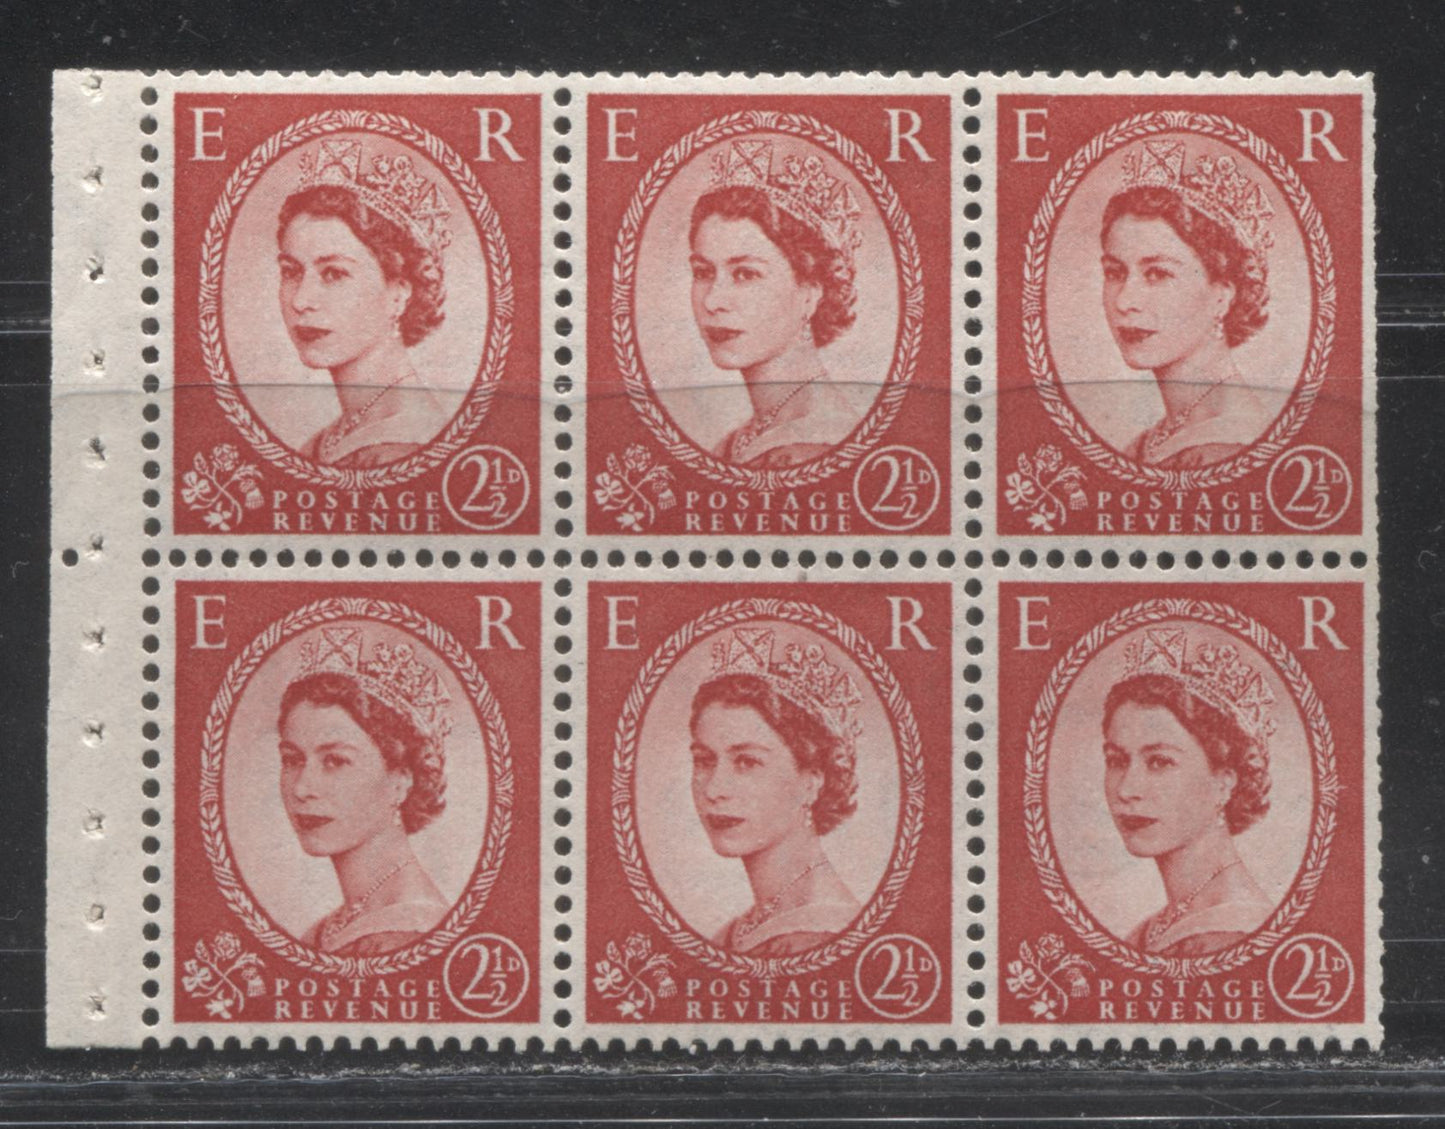 Great Britain SG#H46 5/- Light Grey Blue & Black Cover 1959-1967 Wilding Issue, A Complete Booklet With Mixed Upright and Inverted Multiple St. Edward's Crown Watermark, Panes of 6, Type C GPO Cypher, September 1960